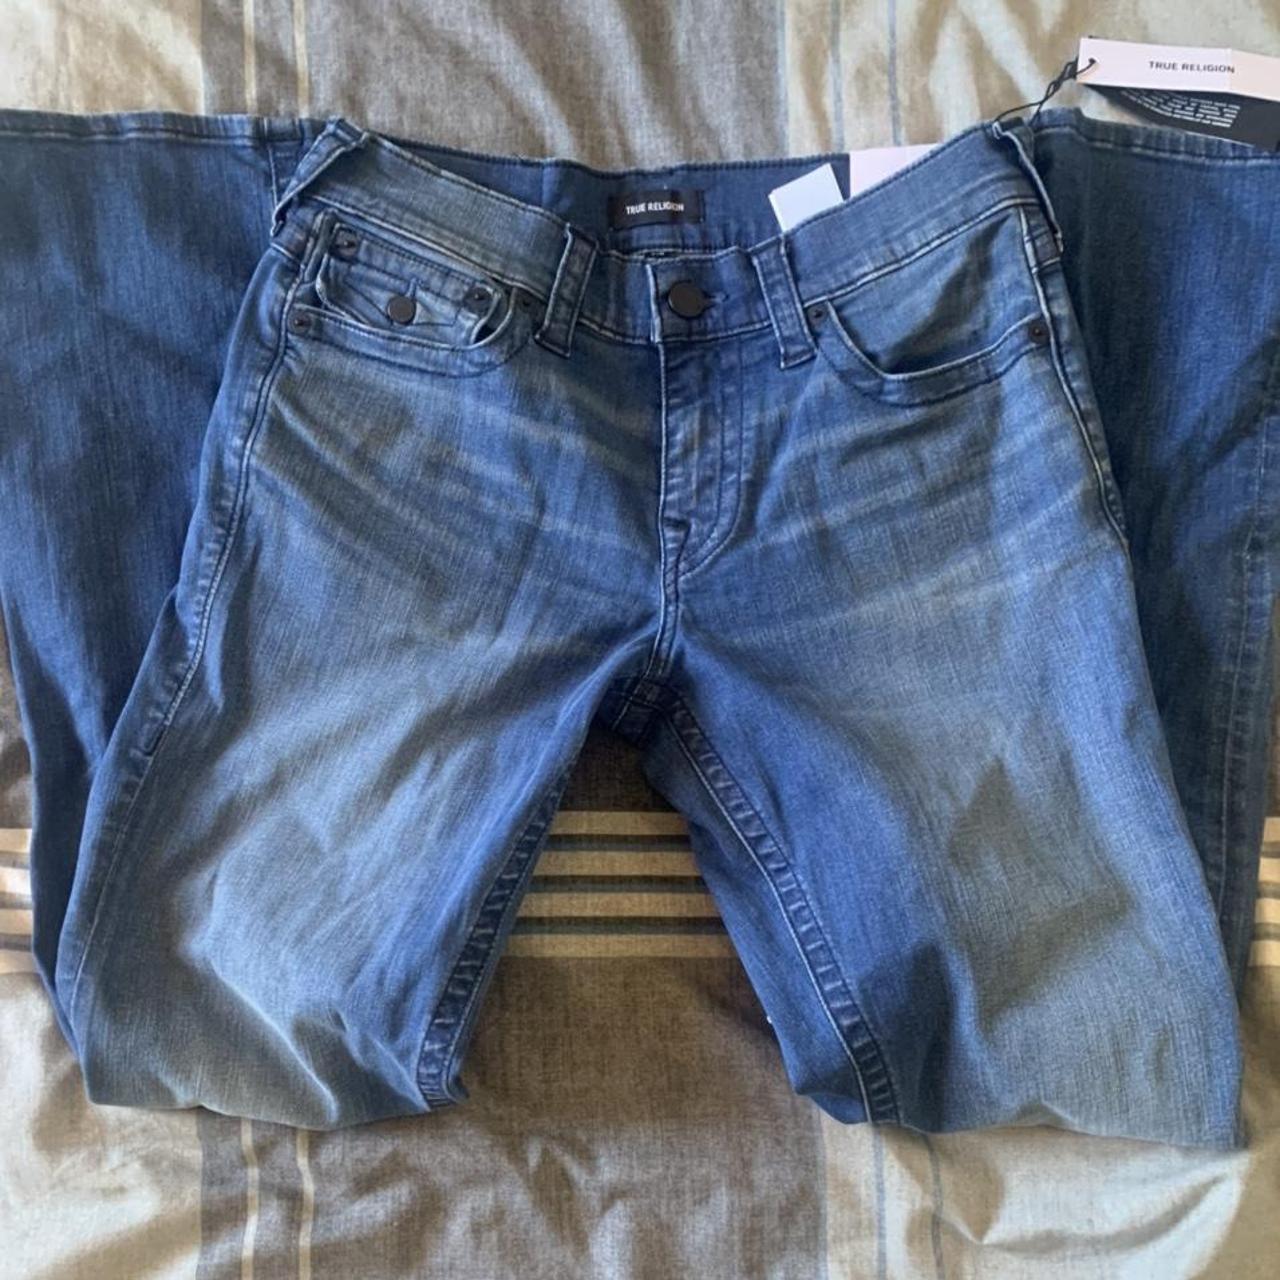 True religion jeans. Brand new with tags brought for... - Depop